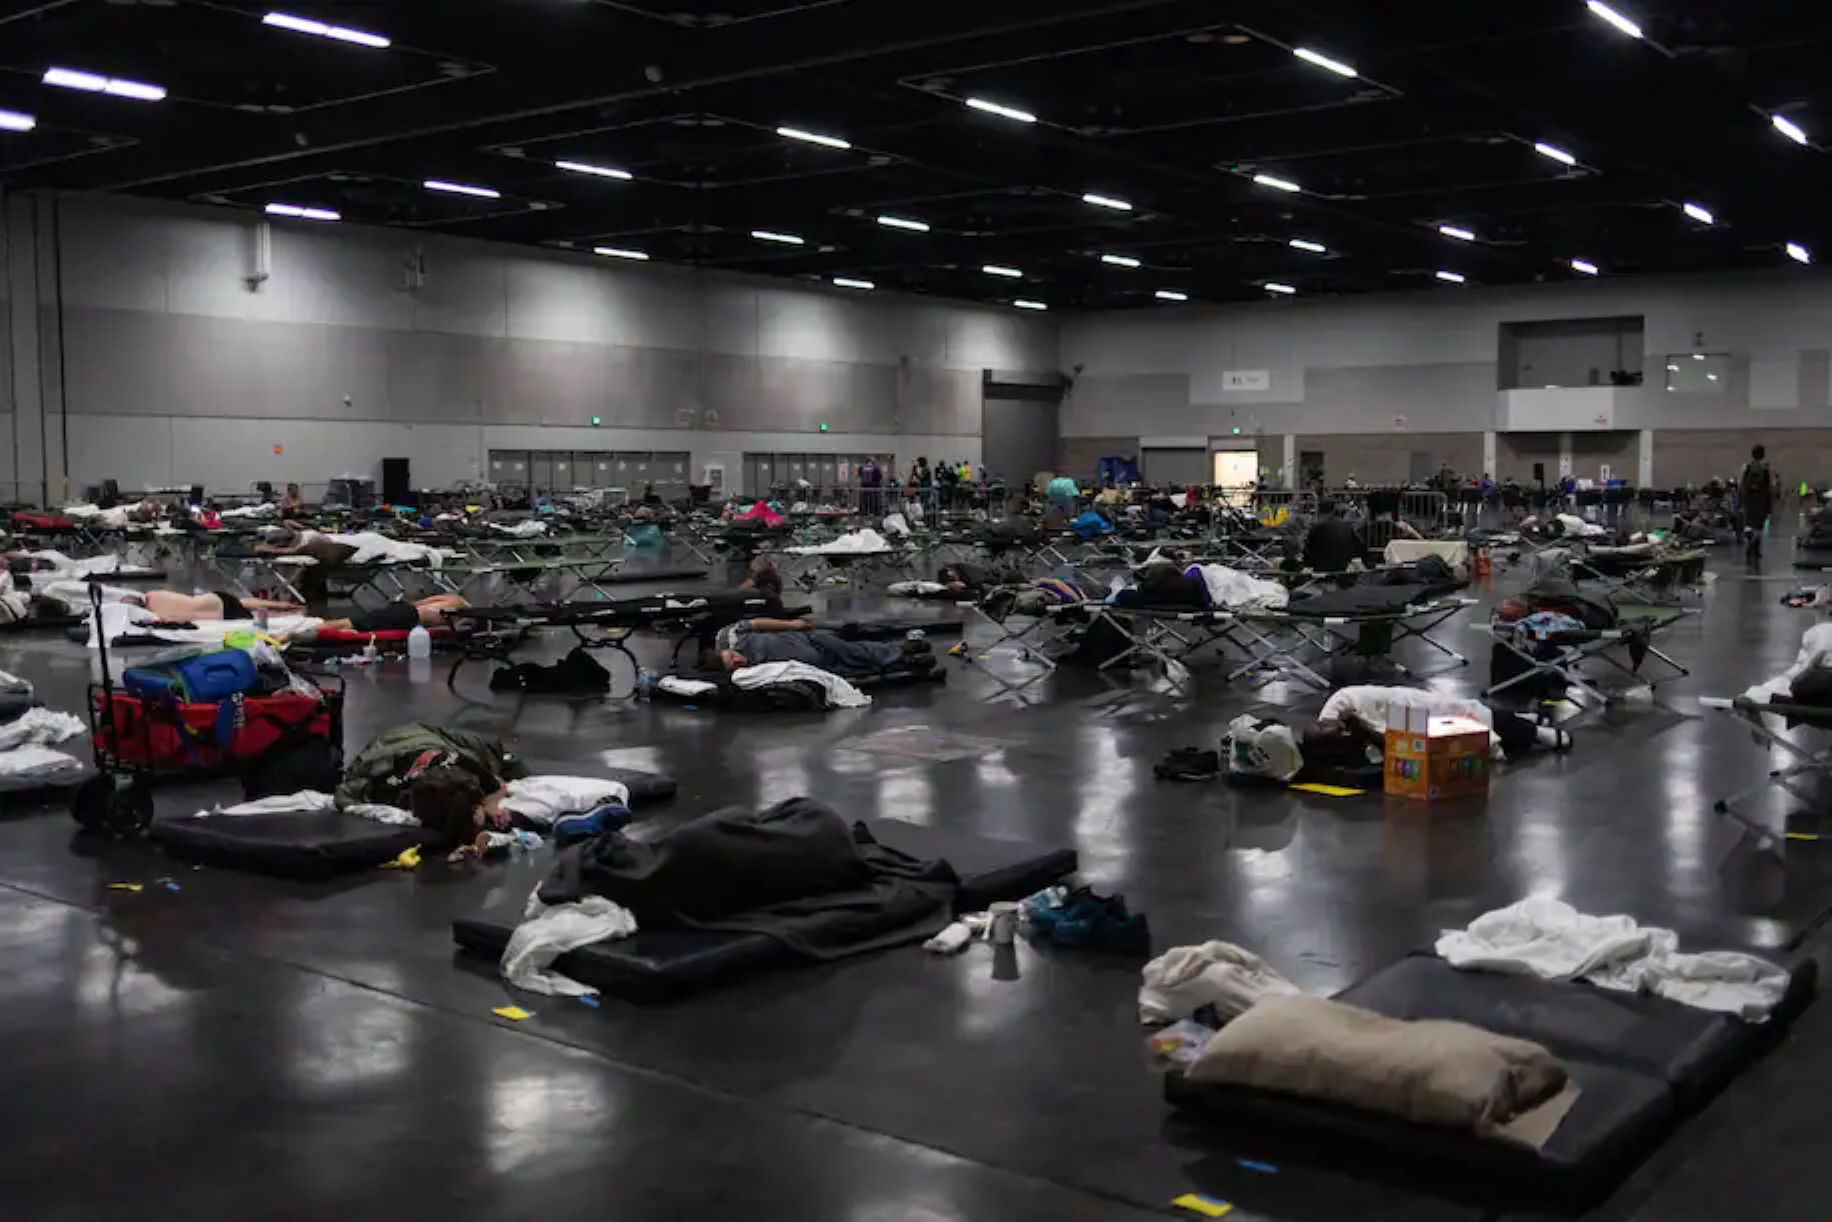 Residents rest at a cooling center during a heat wave in Portland, Oregon on 28 June 2021. Photo: Maranie Staab / Bloomberg